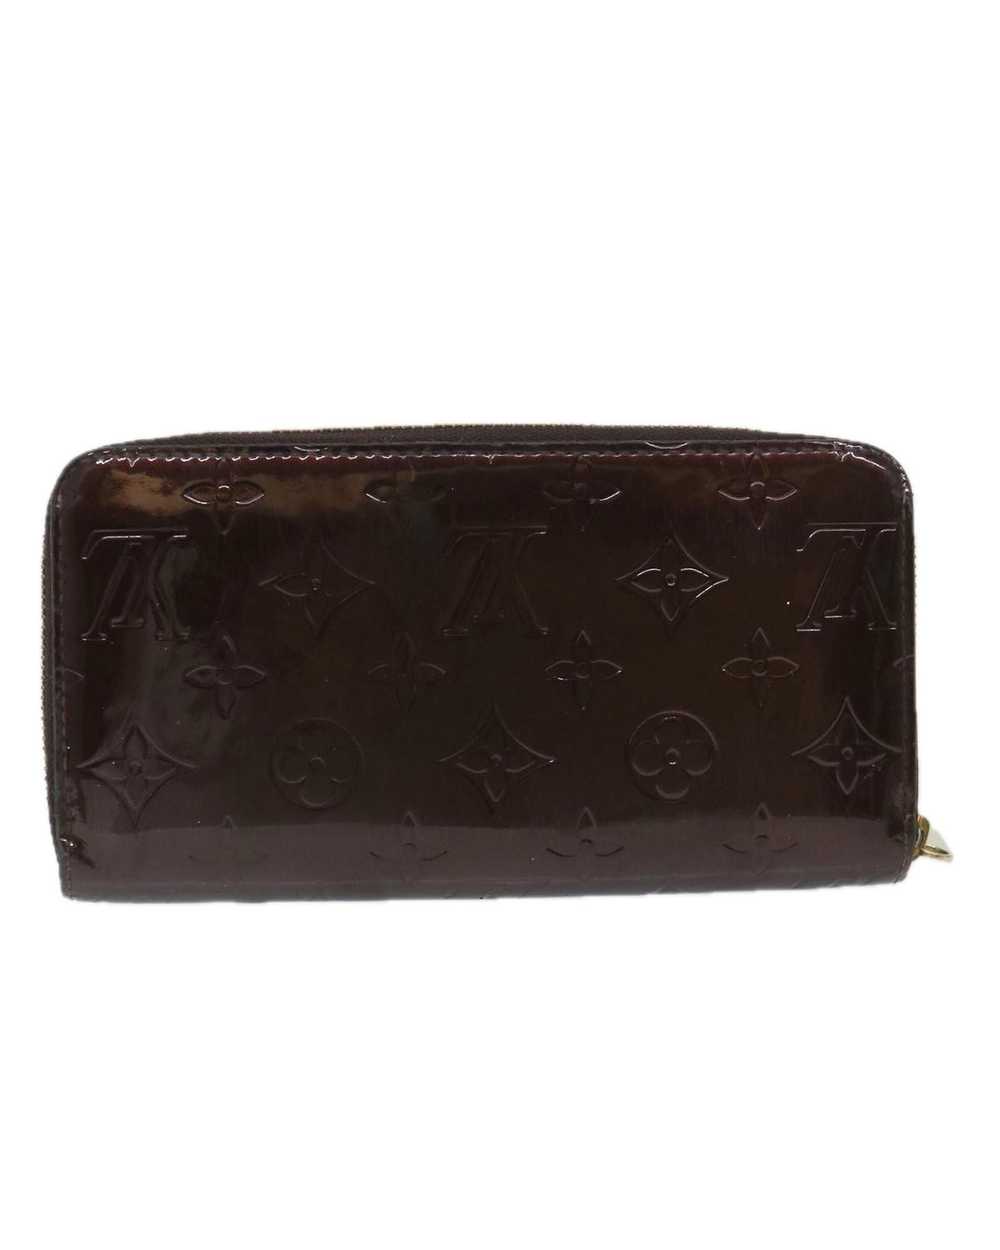 Louis Vuitton Patent Leather Long Wallet with Mul… - image 2